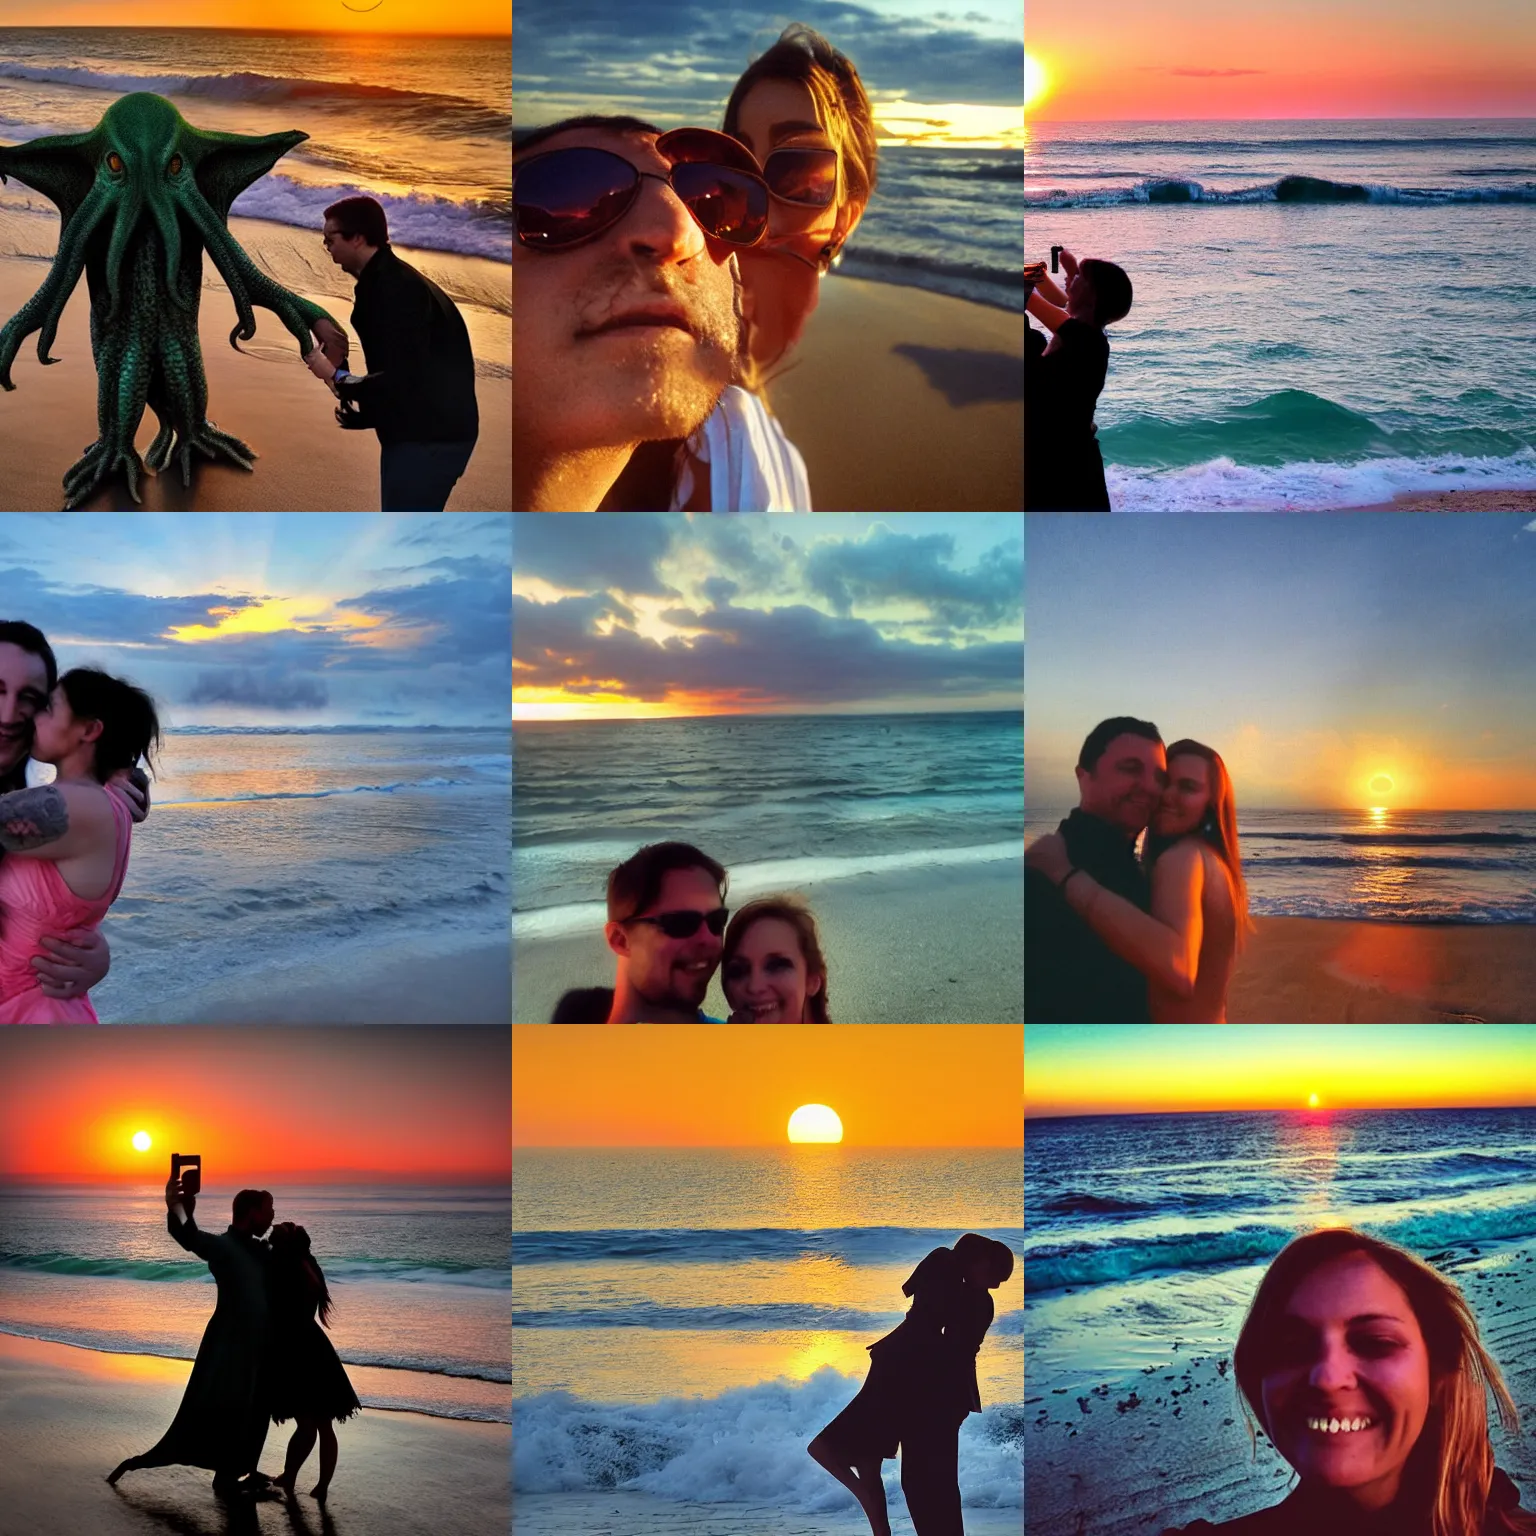 Prompt: Cthulhu photobombing a romantic selfie on a beach at sunset